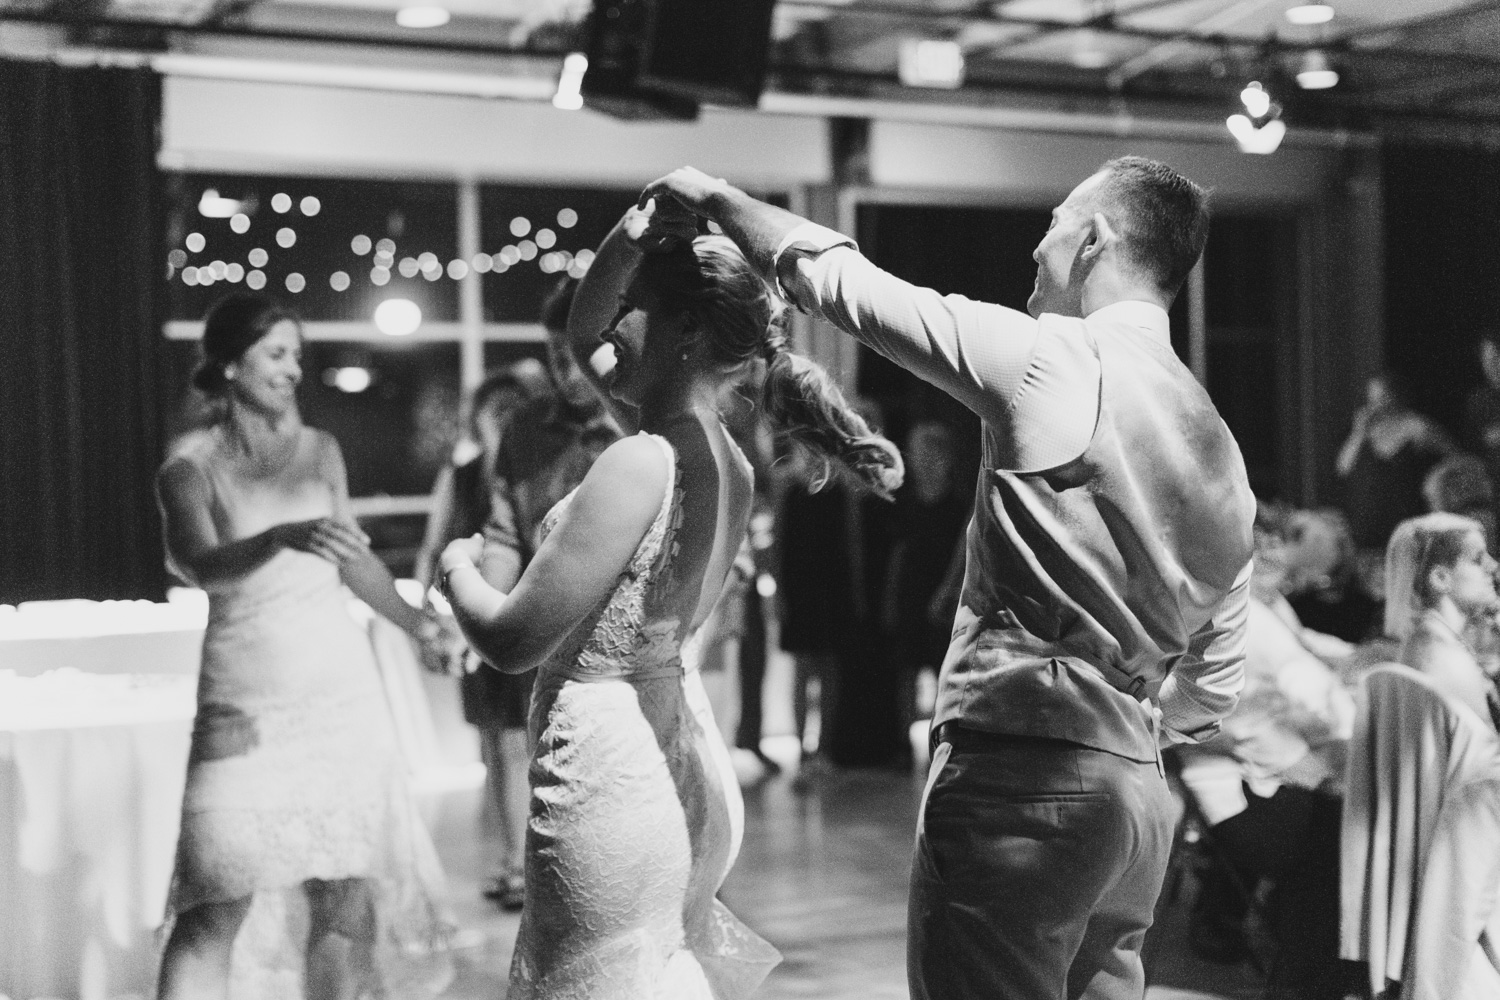 Steph & Jacob | Wedding Photos - The First Dance | Wedding & Event Planners | Dreamgroup